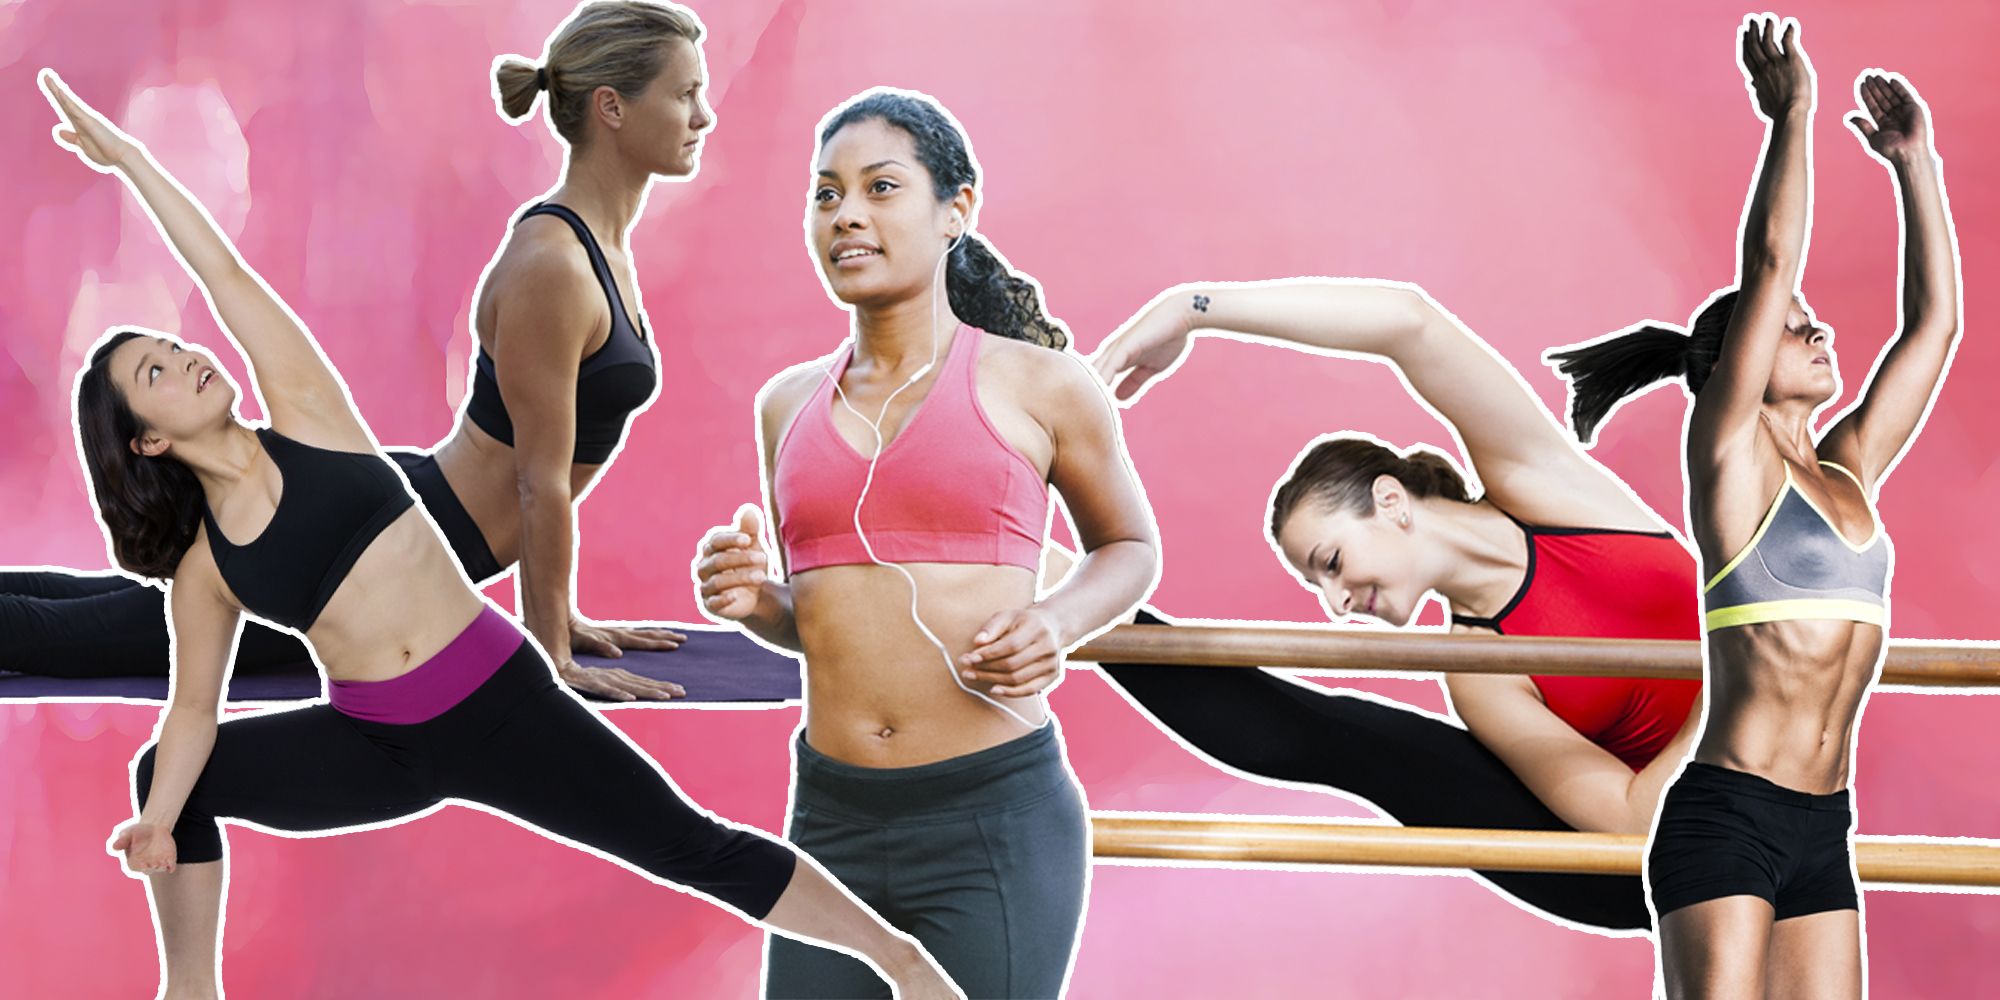 4 Tips on How to Make The Most of Your Barre Workout While